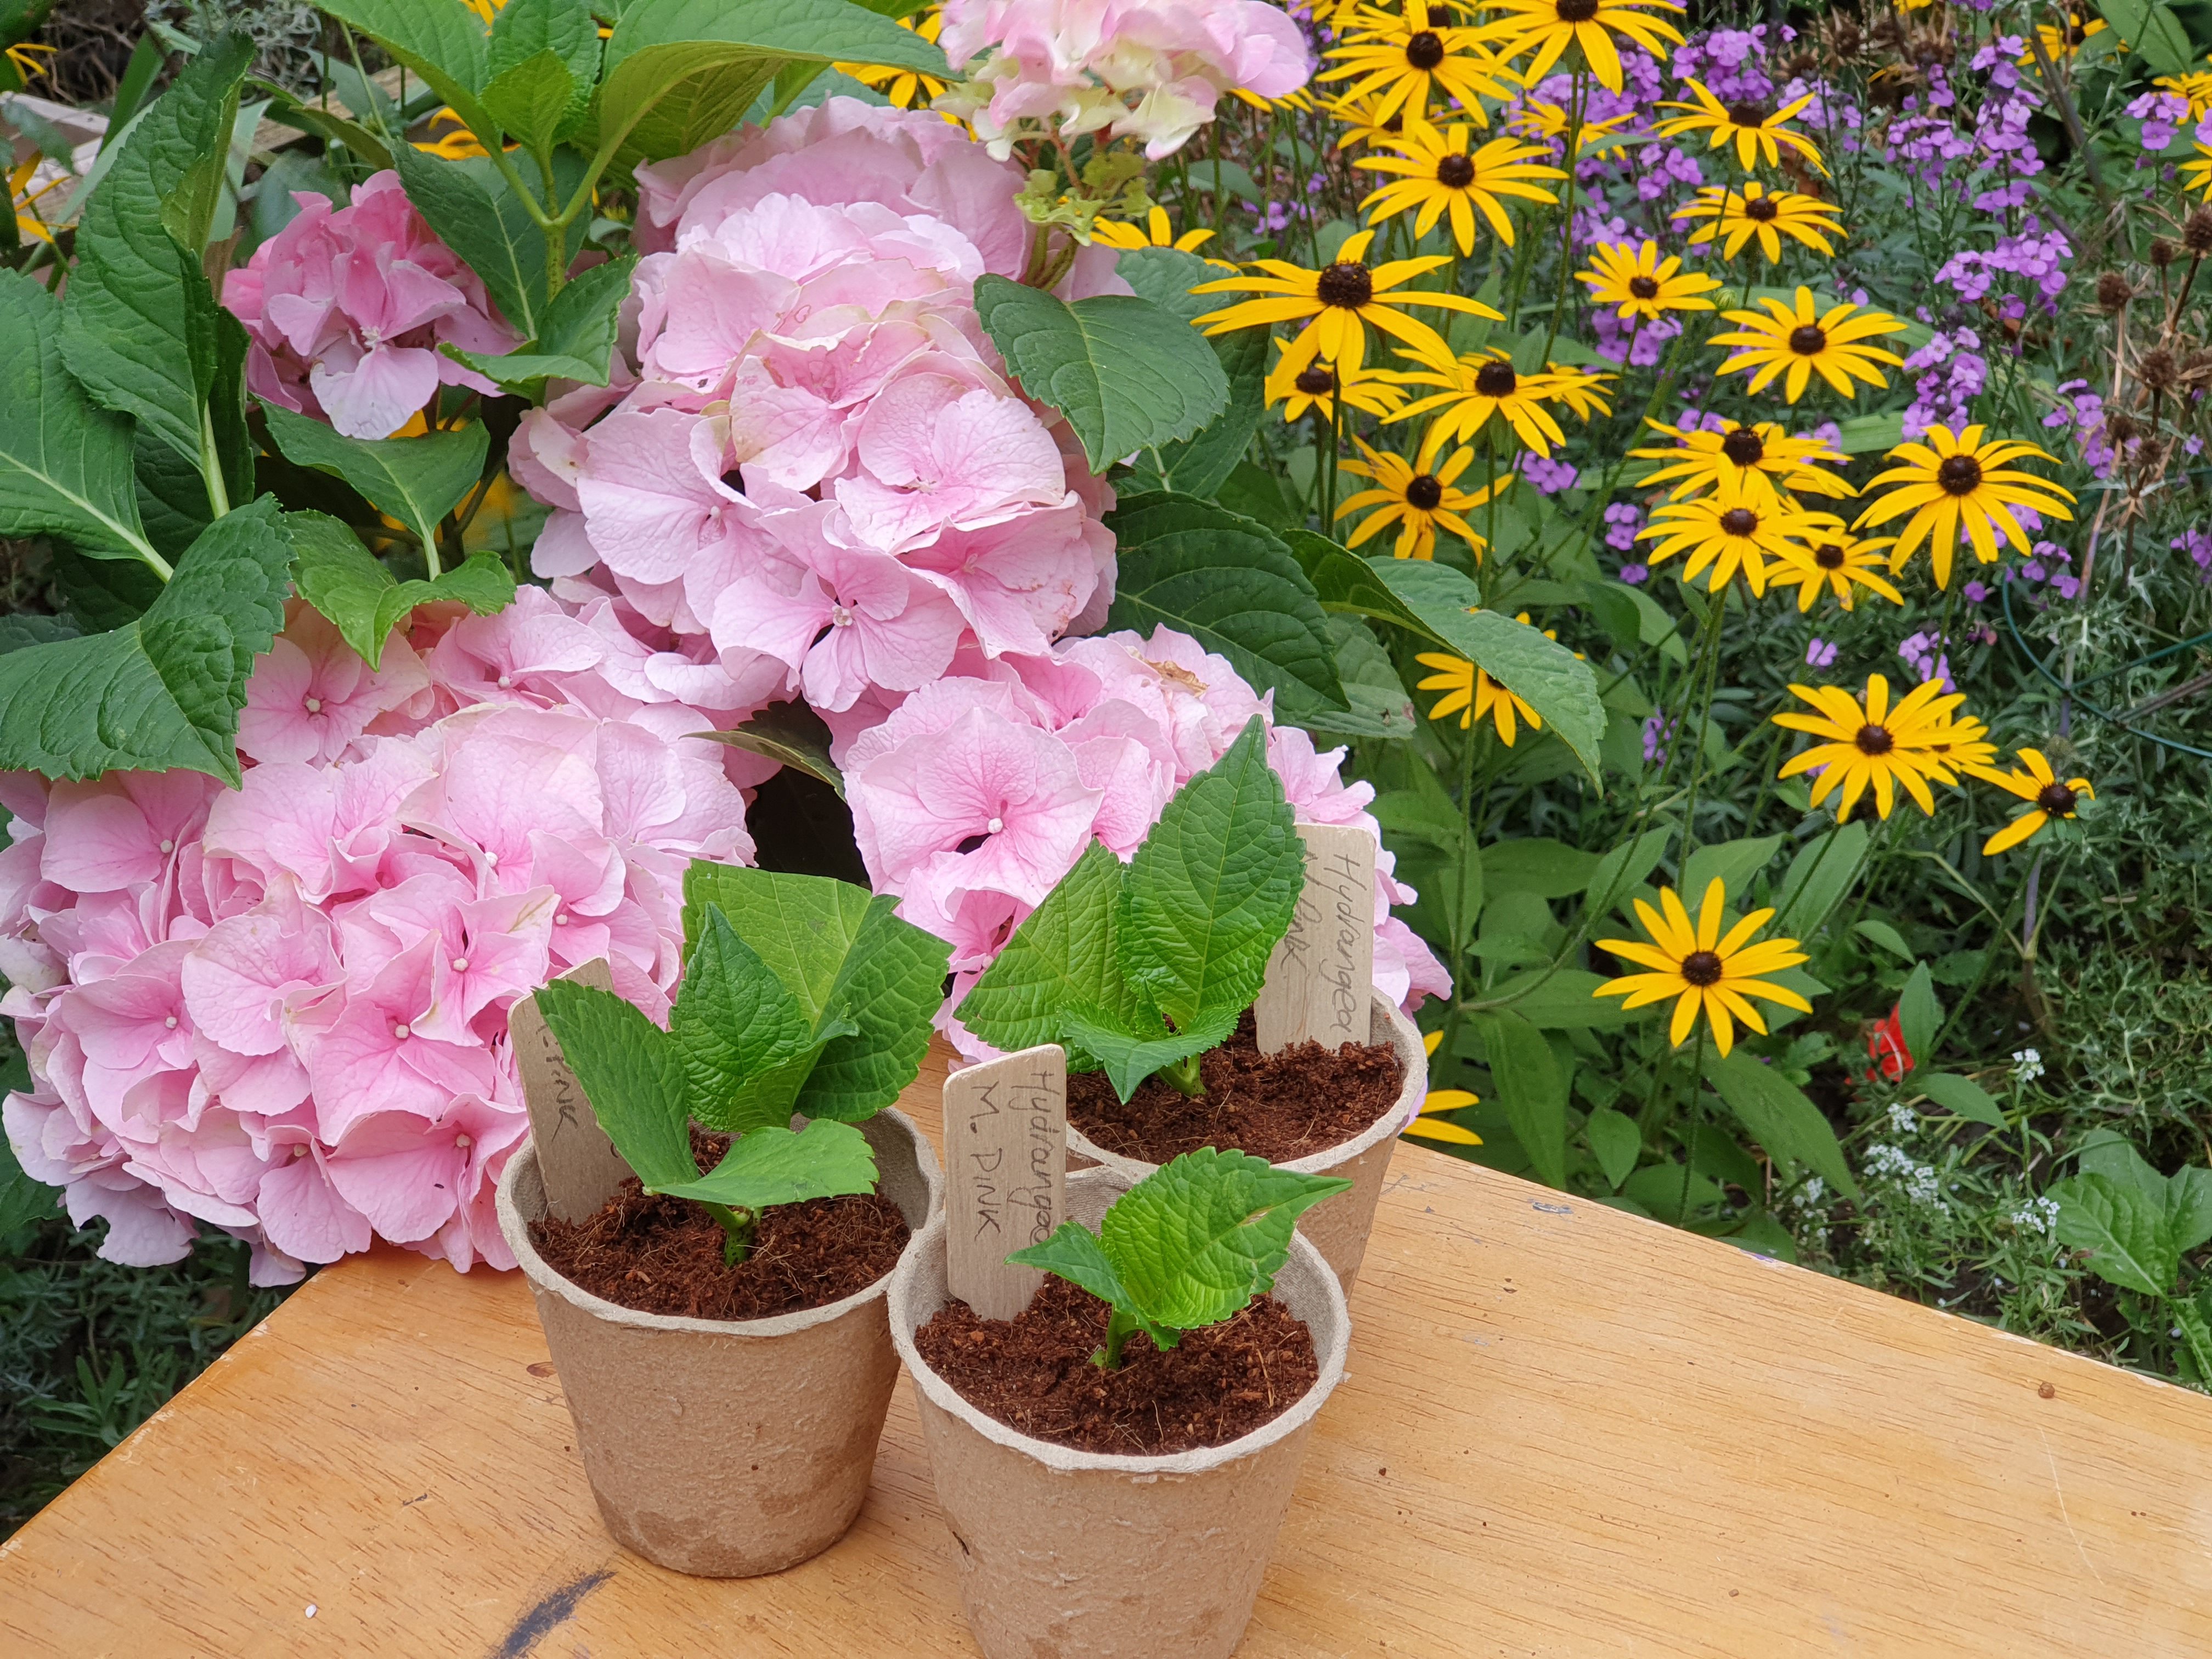 hydrangea cuttings potted up with parent plant